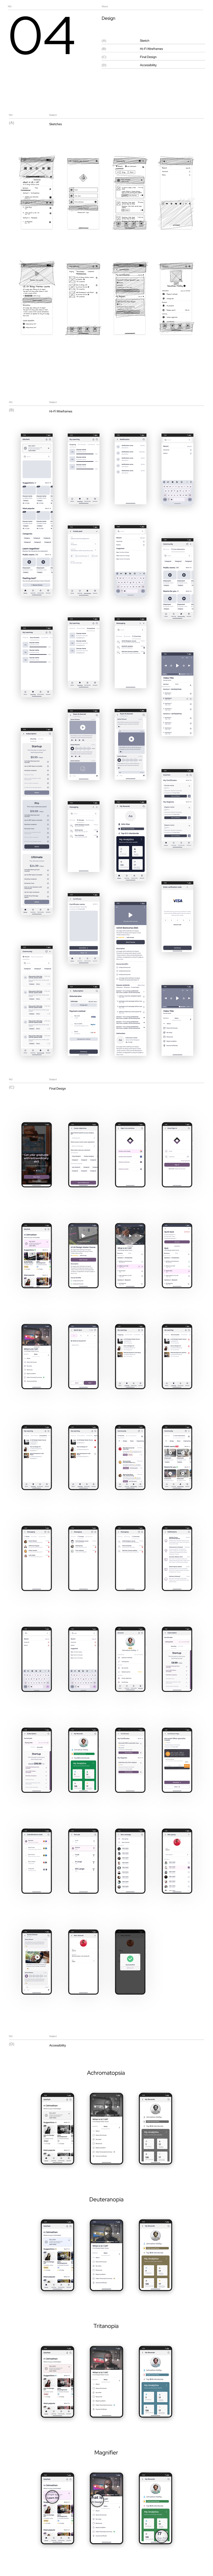 Education learning study UI/UX Mobile app Case Study Figma sketch skills